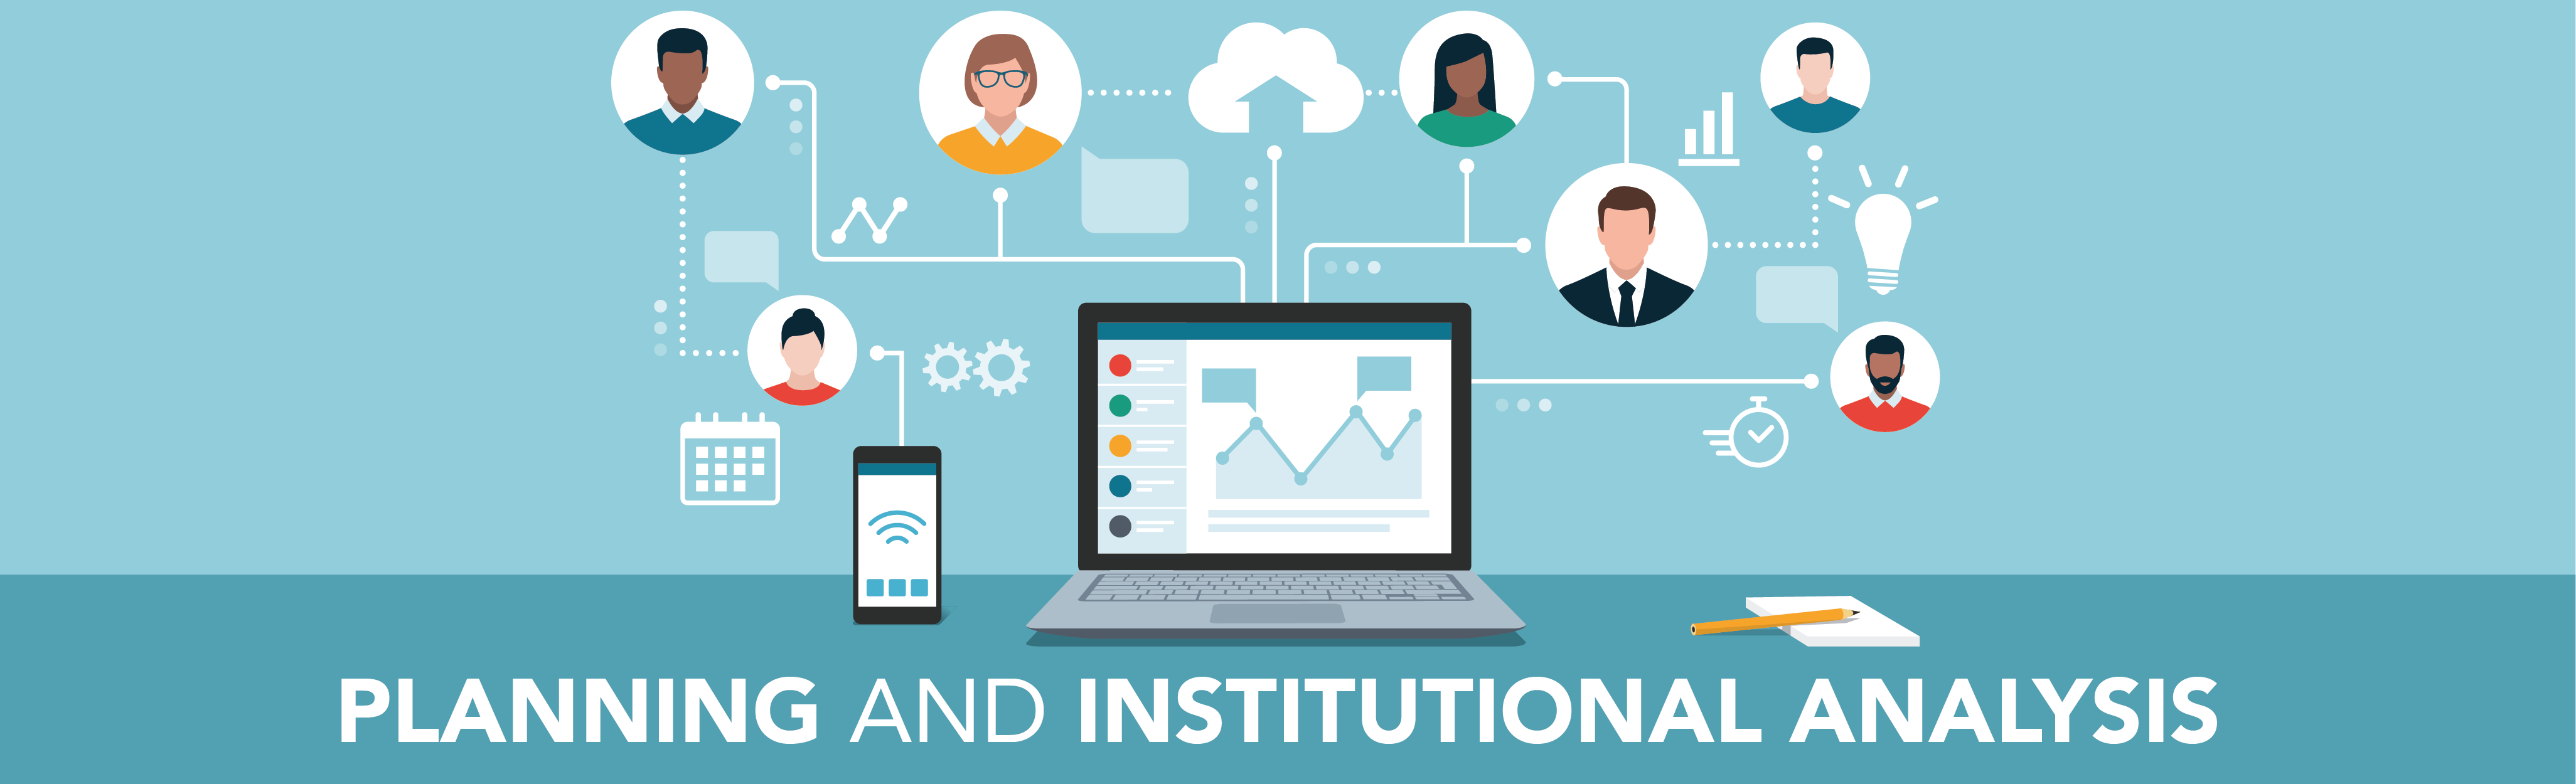 Planning and Institutional Analysis Unit - banner